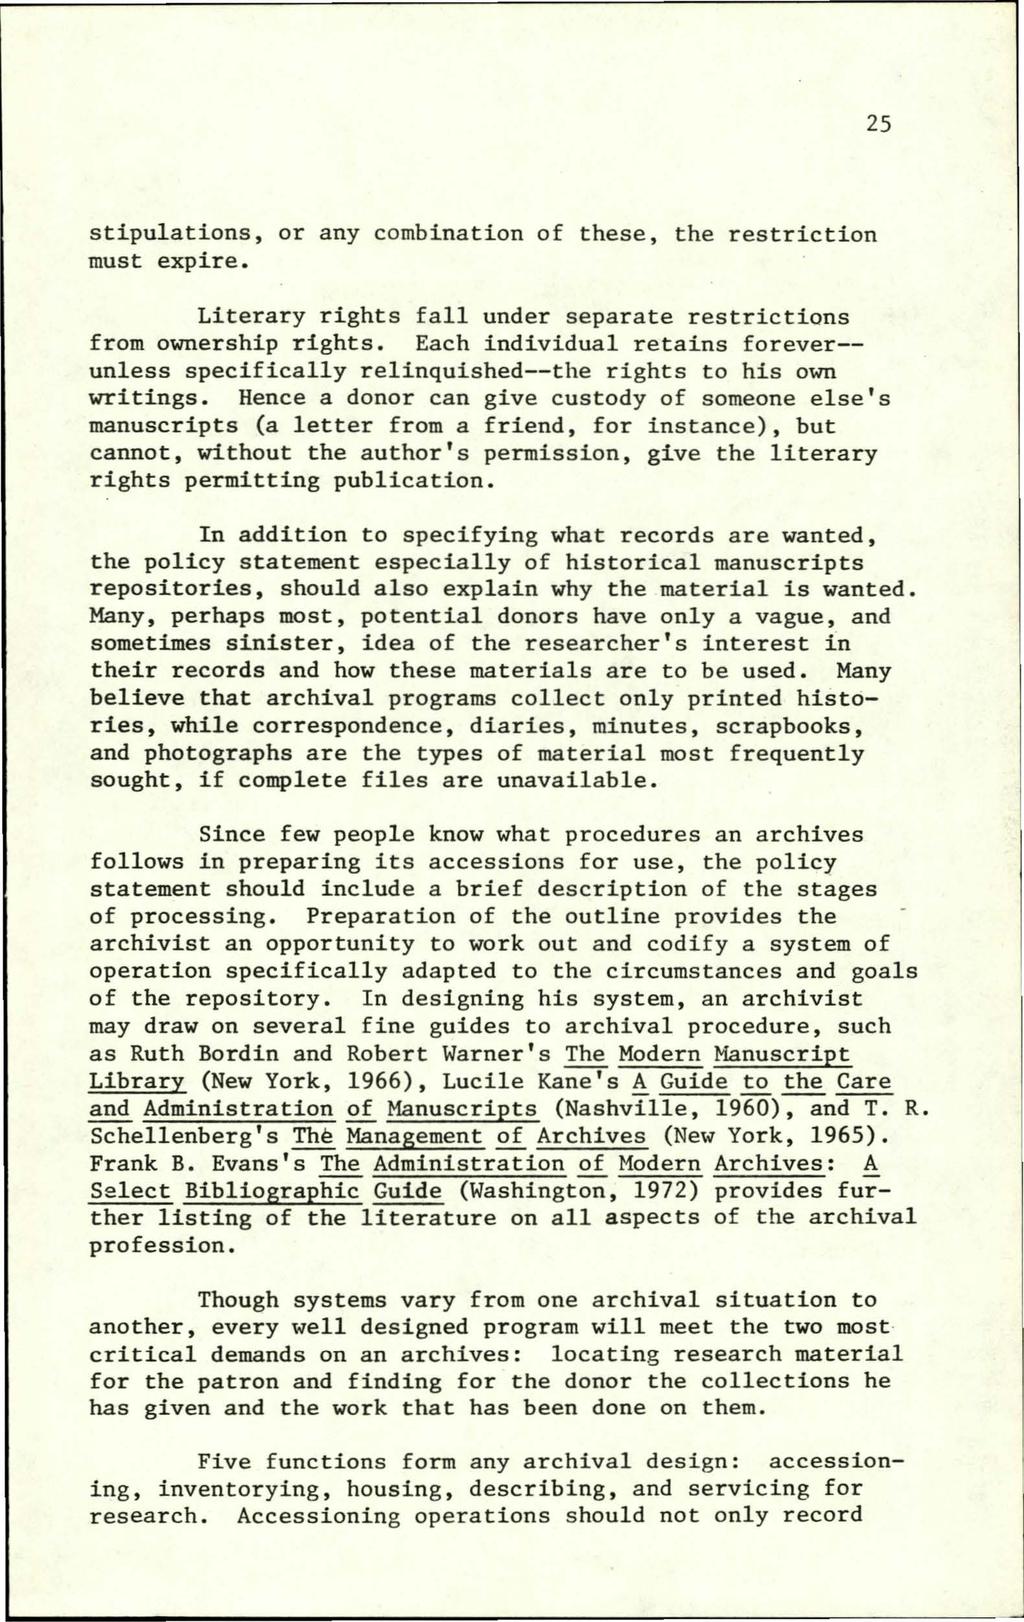 Georgia Archive, Vol. 1 [1973], No. 1, Art. 4 25 stipulations, or any combination of these, the restriction must expire. Literary rights fall under separate restrictions from ownership rights.